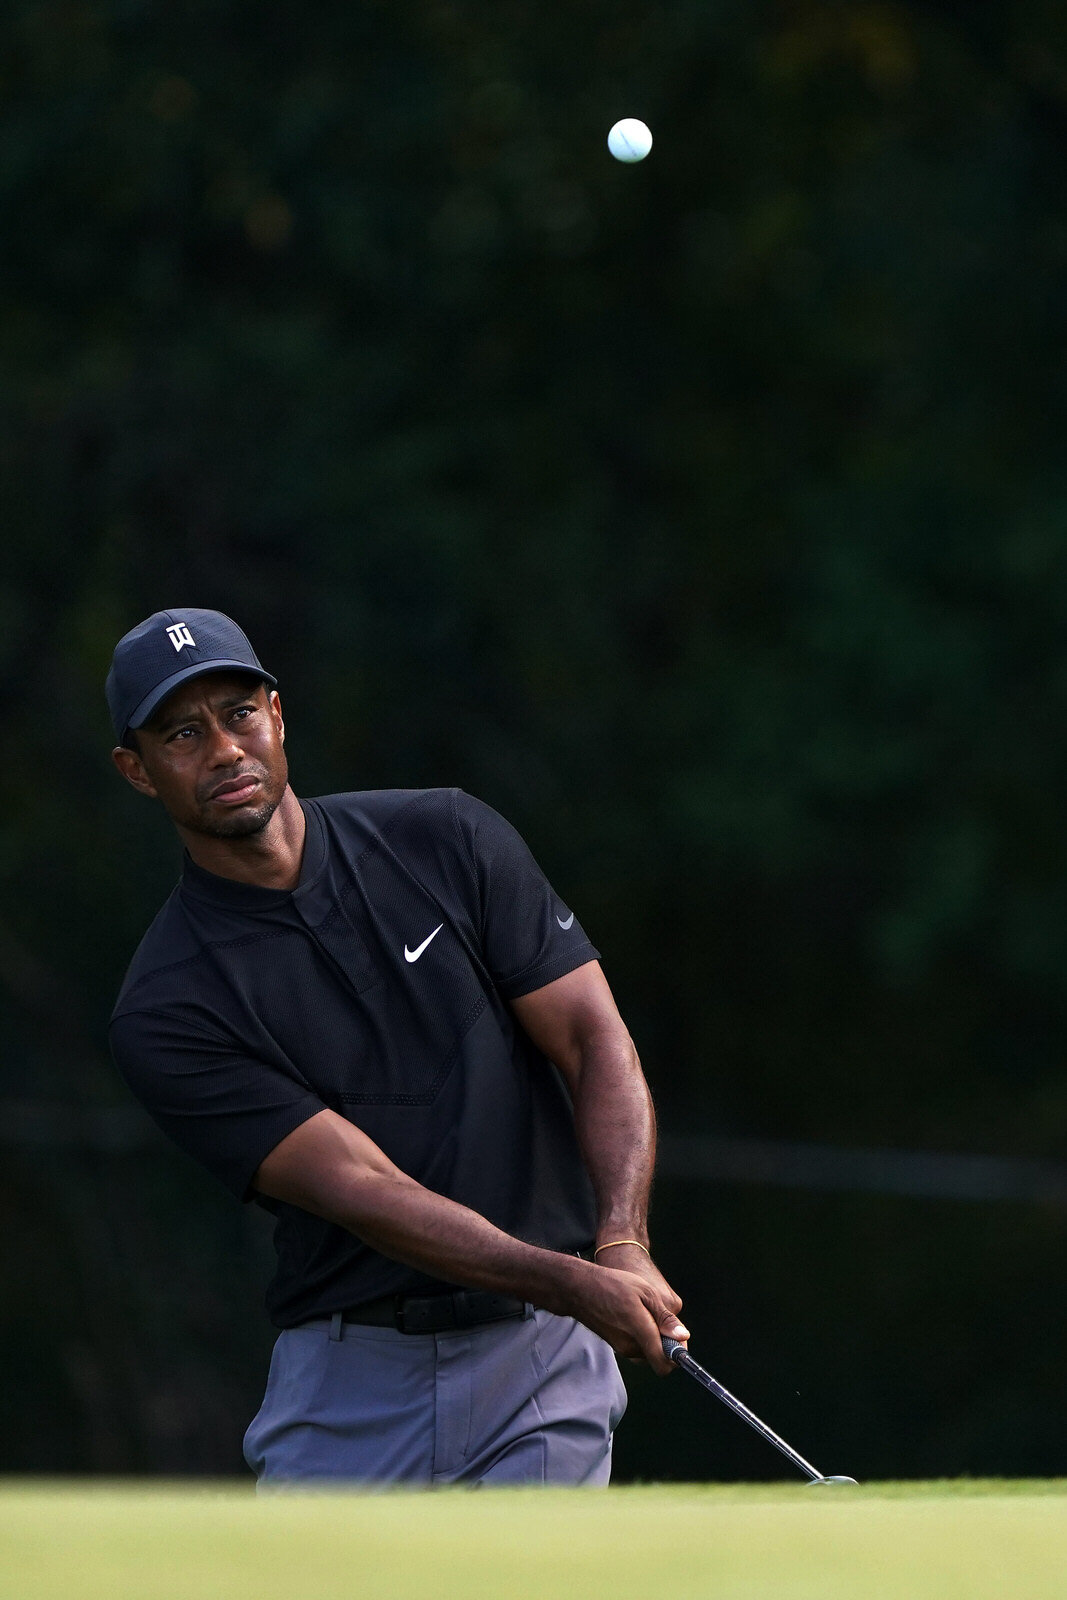  OLYMPIA FIELDS, ILLINOIS - AUGUST 29: Tiger Woods of the United States chips to the fifth green during the third round of the BMW Championship on the North Course at Olympia Fields Country Club on August 29, 2020 in Olympia Fields, Illinois. (Photo 